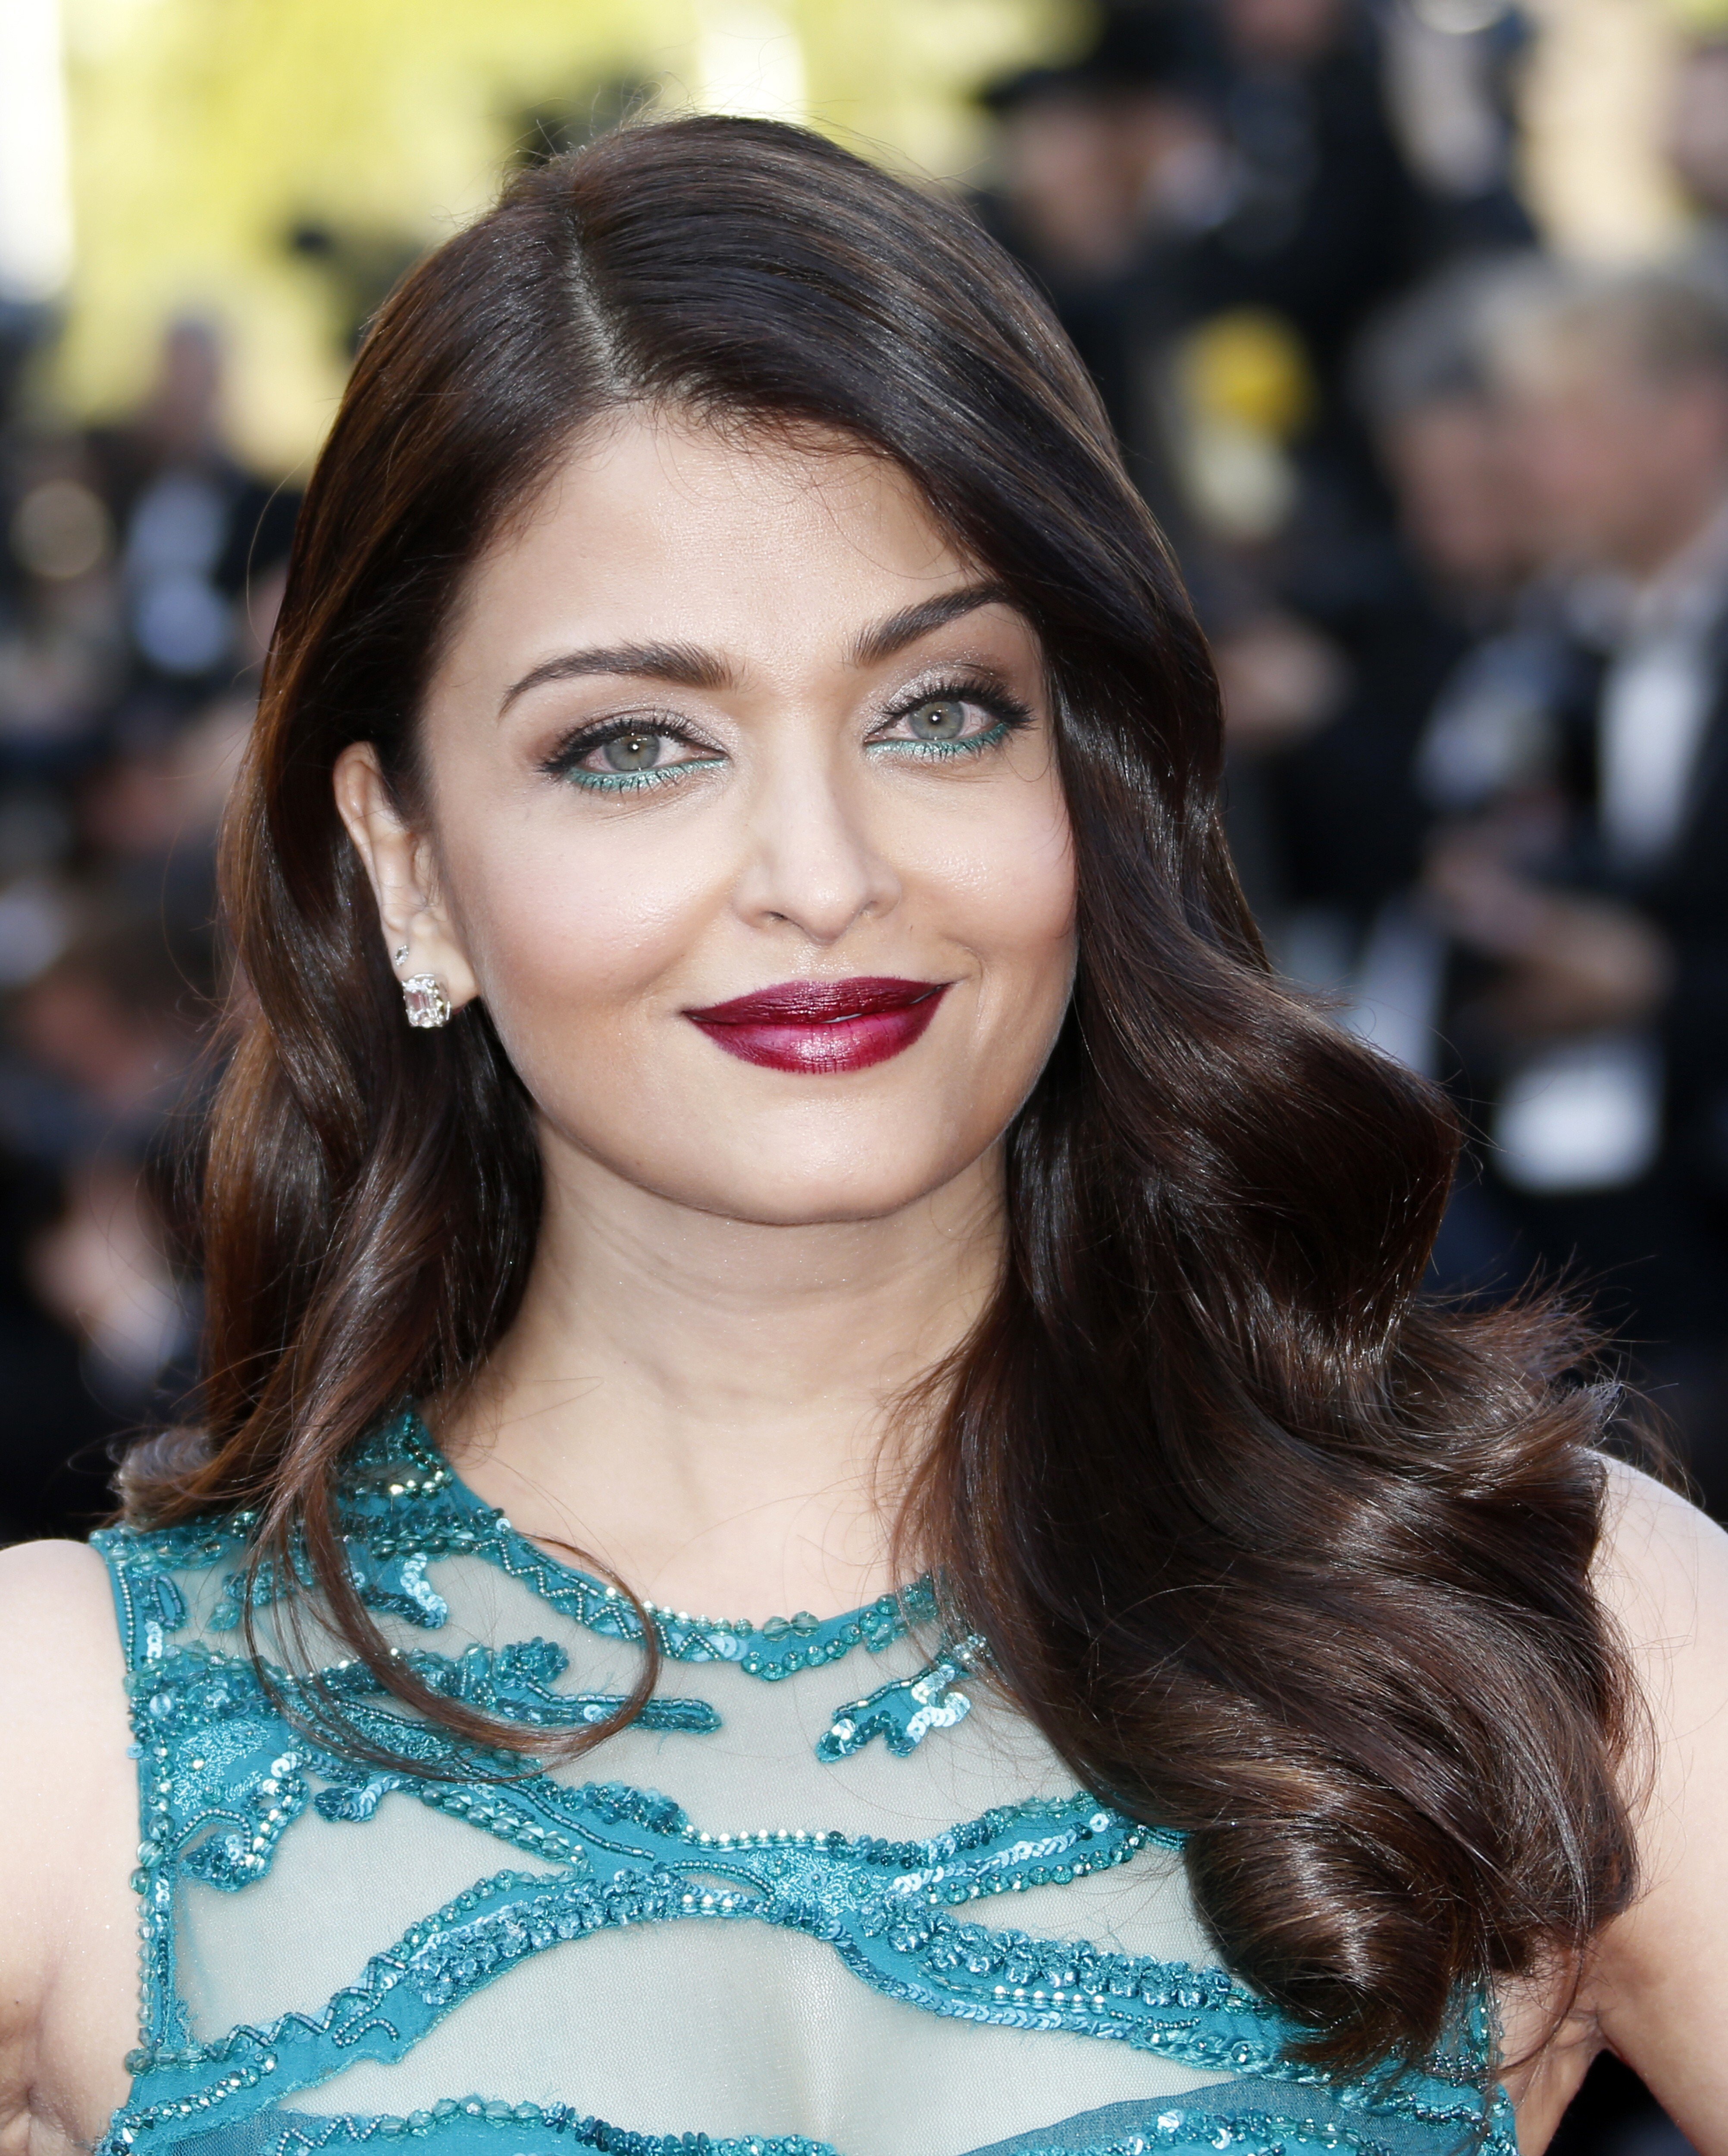 Aishwarya Rai Blue Film Sex Videos - How Aishwarya Rai Bachchan went from blue-eyed schoolgirl beauty to Miss  World, to film superstar and one half of a Bollywood power couple with  husband Abhishek Bachchan | South China Morning Post